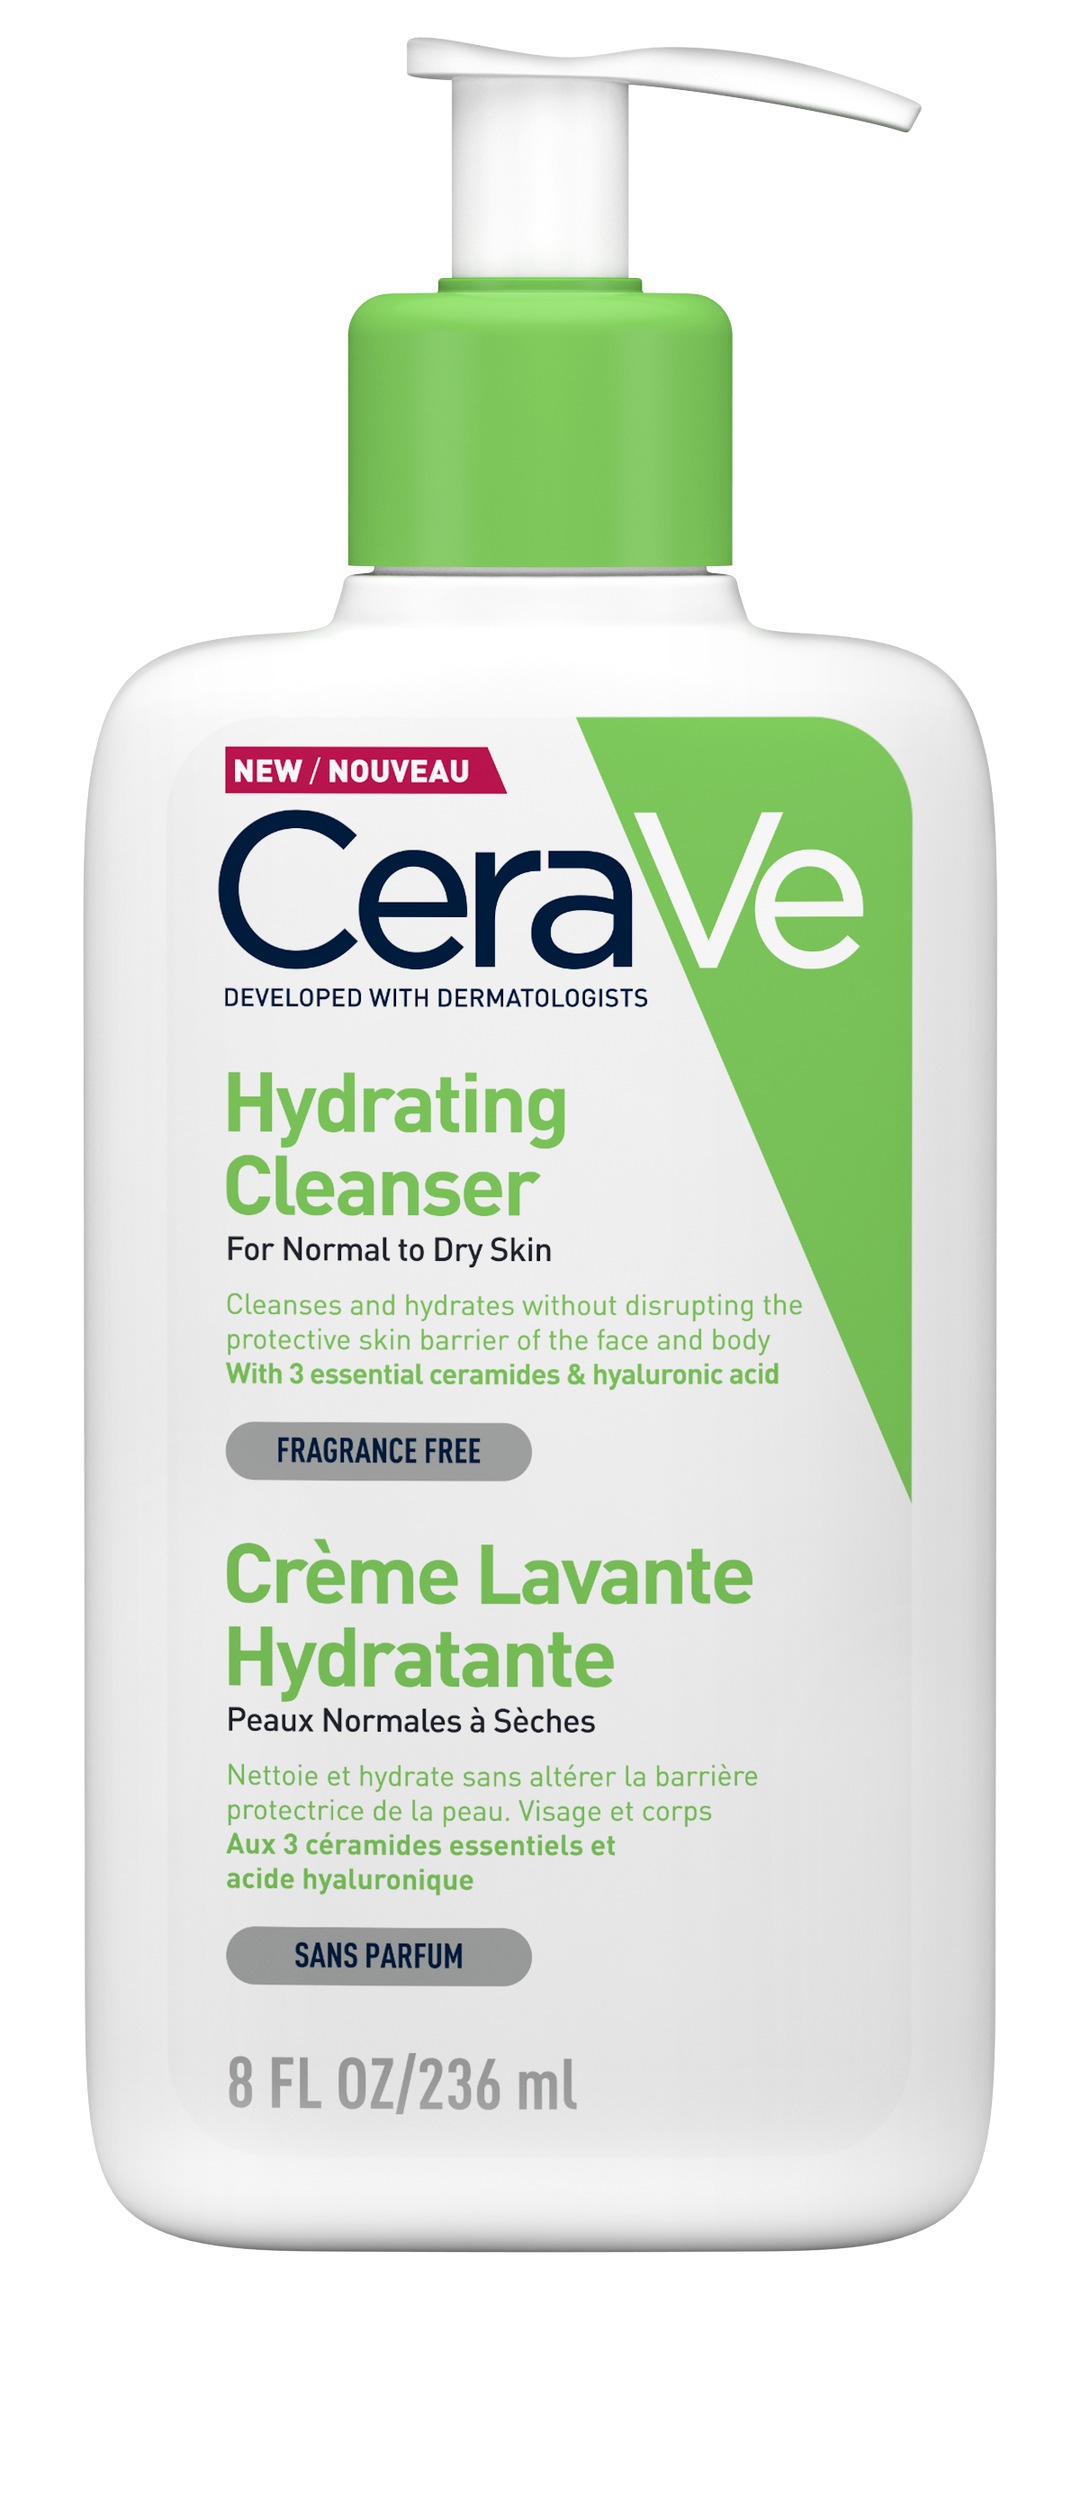 CeraVe Hydrating Cleanser pomp 236ml- Cerave - Huidproducten.nl